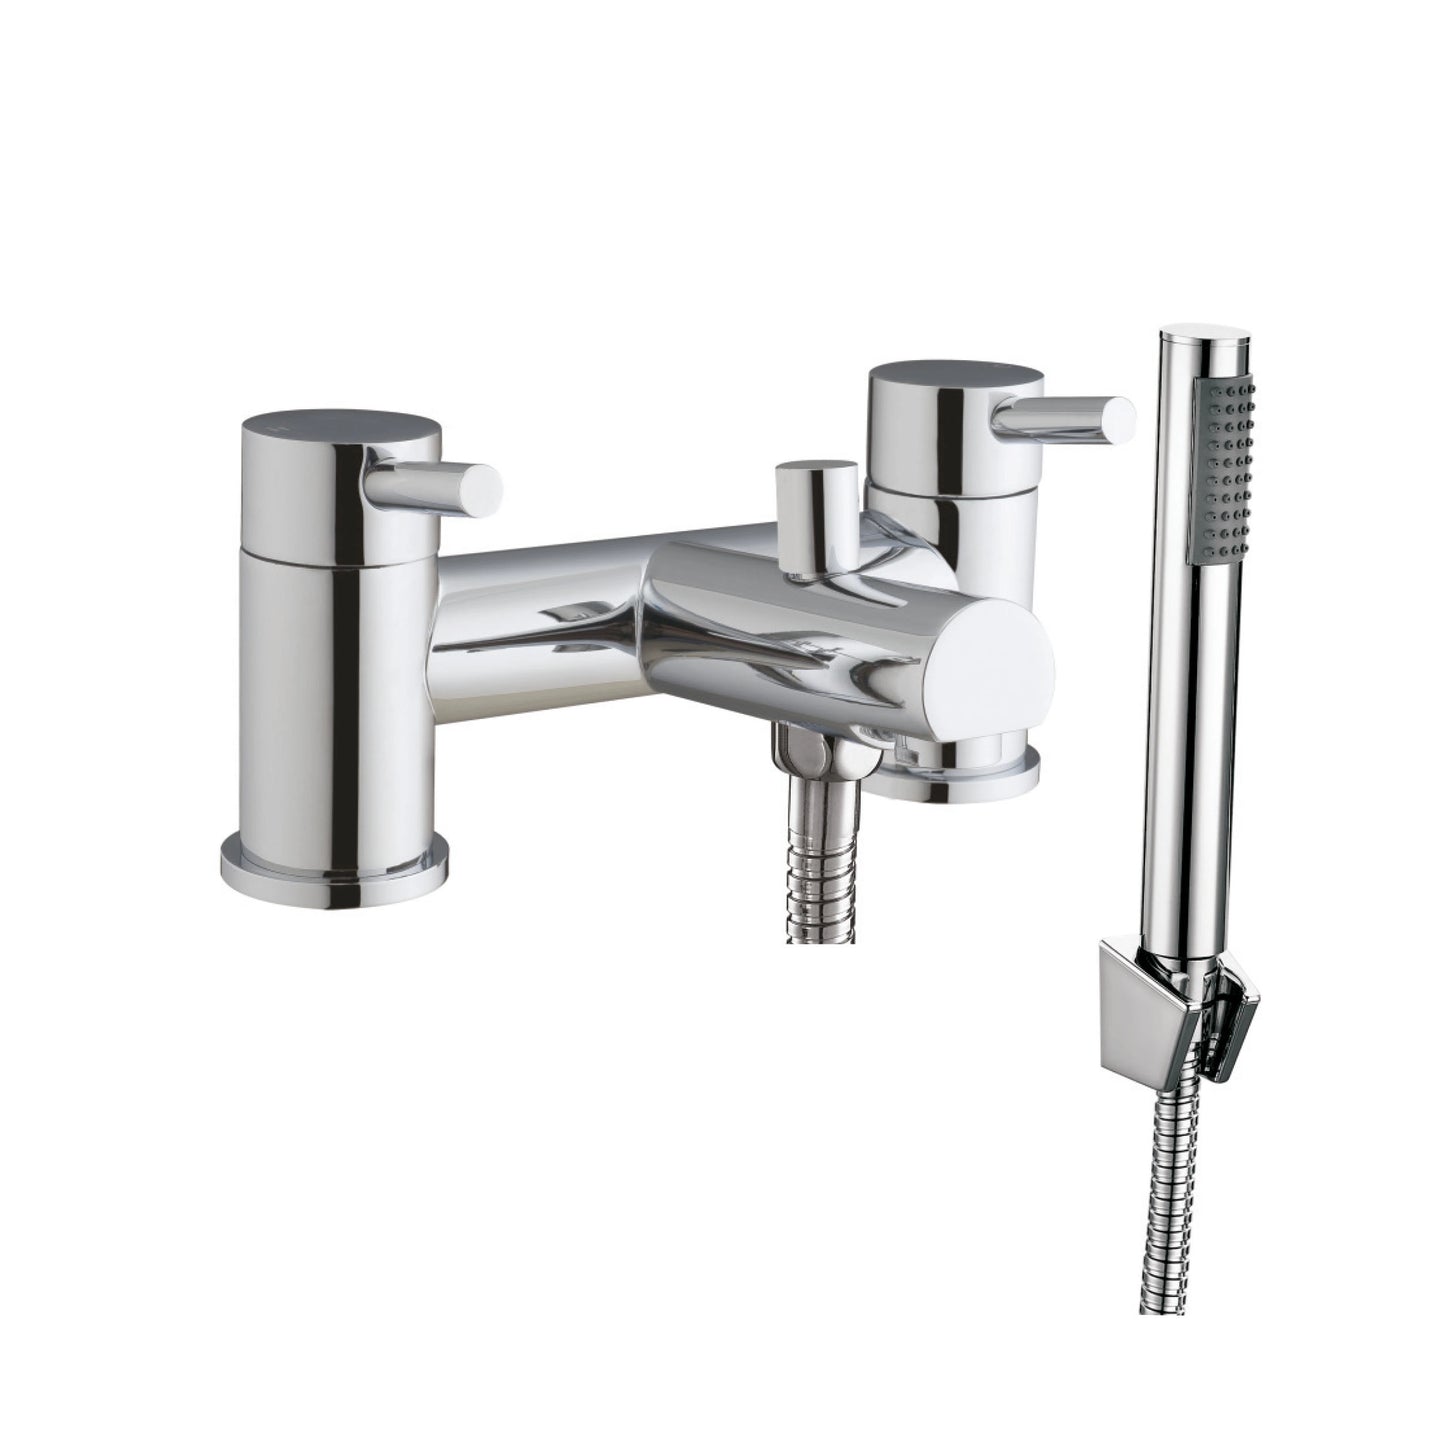 Premier Bath Shower Mixer Tap with Shower Kit and Wall bracket